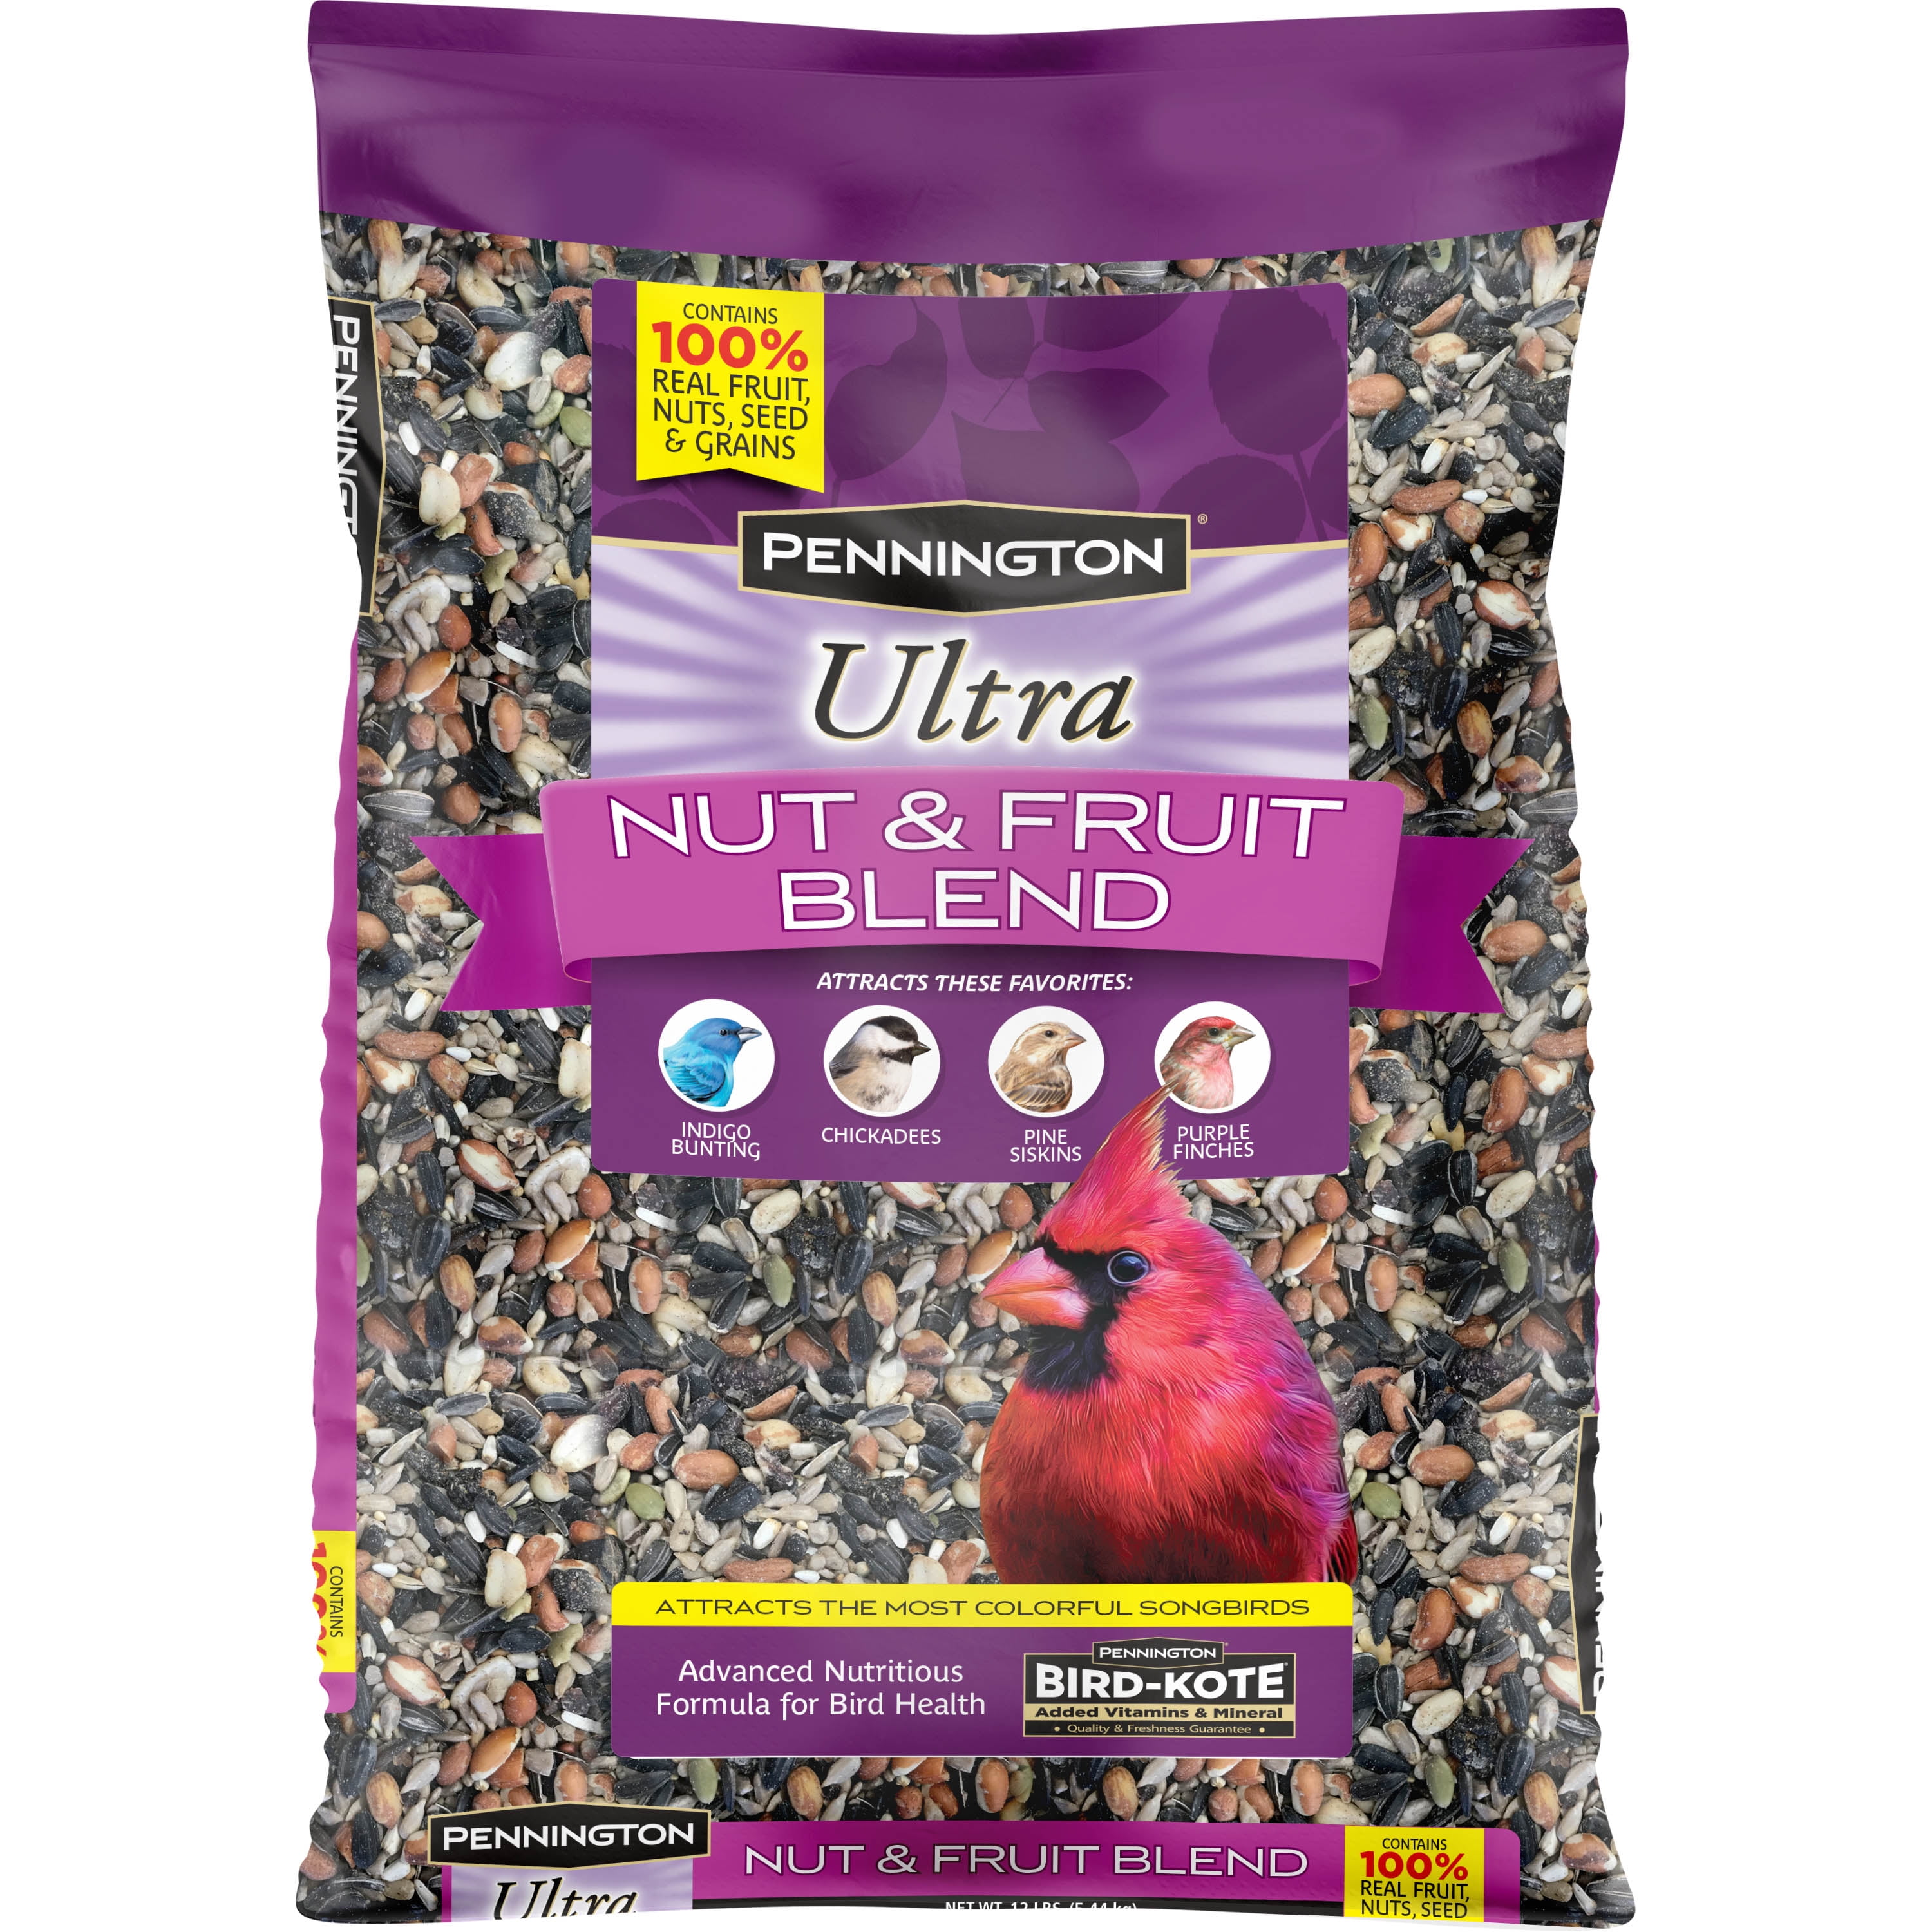 Easily feed feathery friends. request favor bags Great gifts 8 or 10 Birdseed cakes New window feeder option /& fruit and nut blend